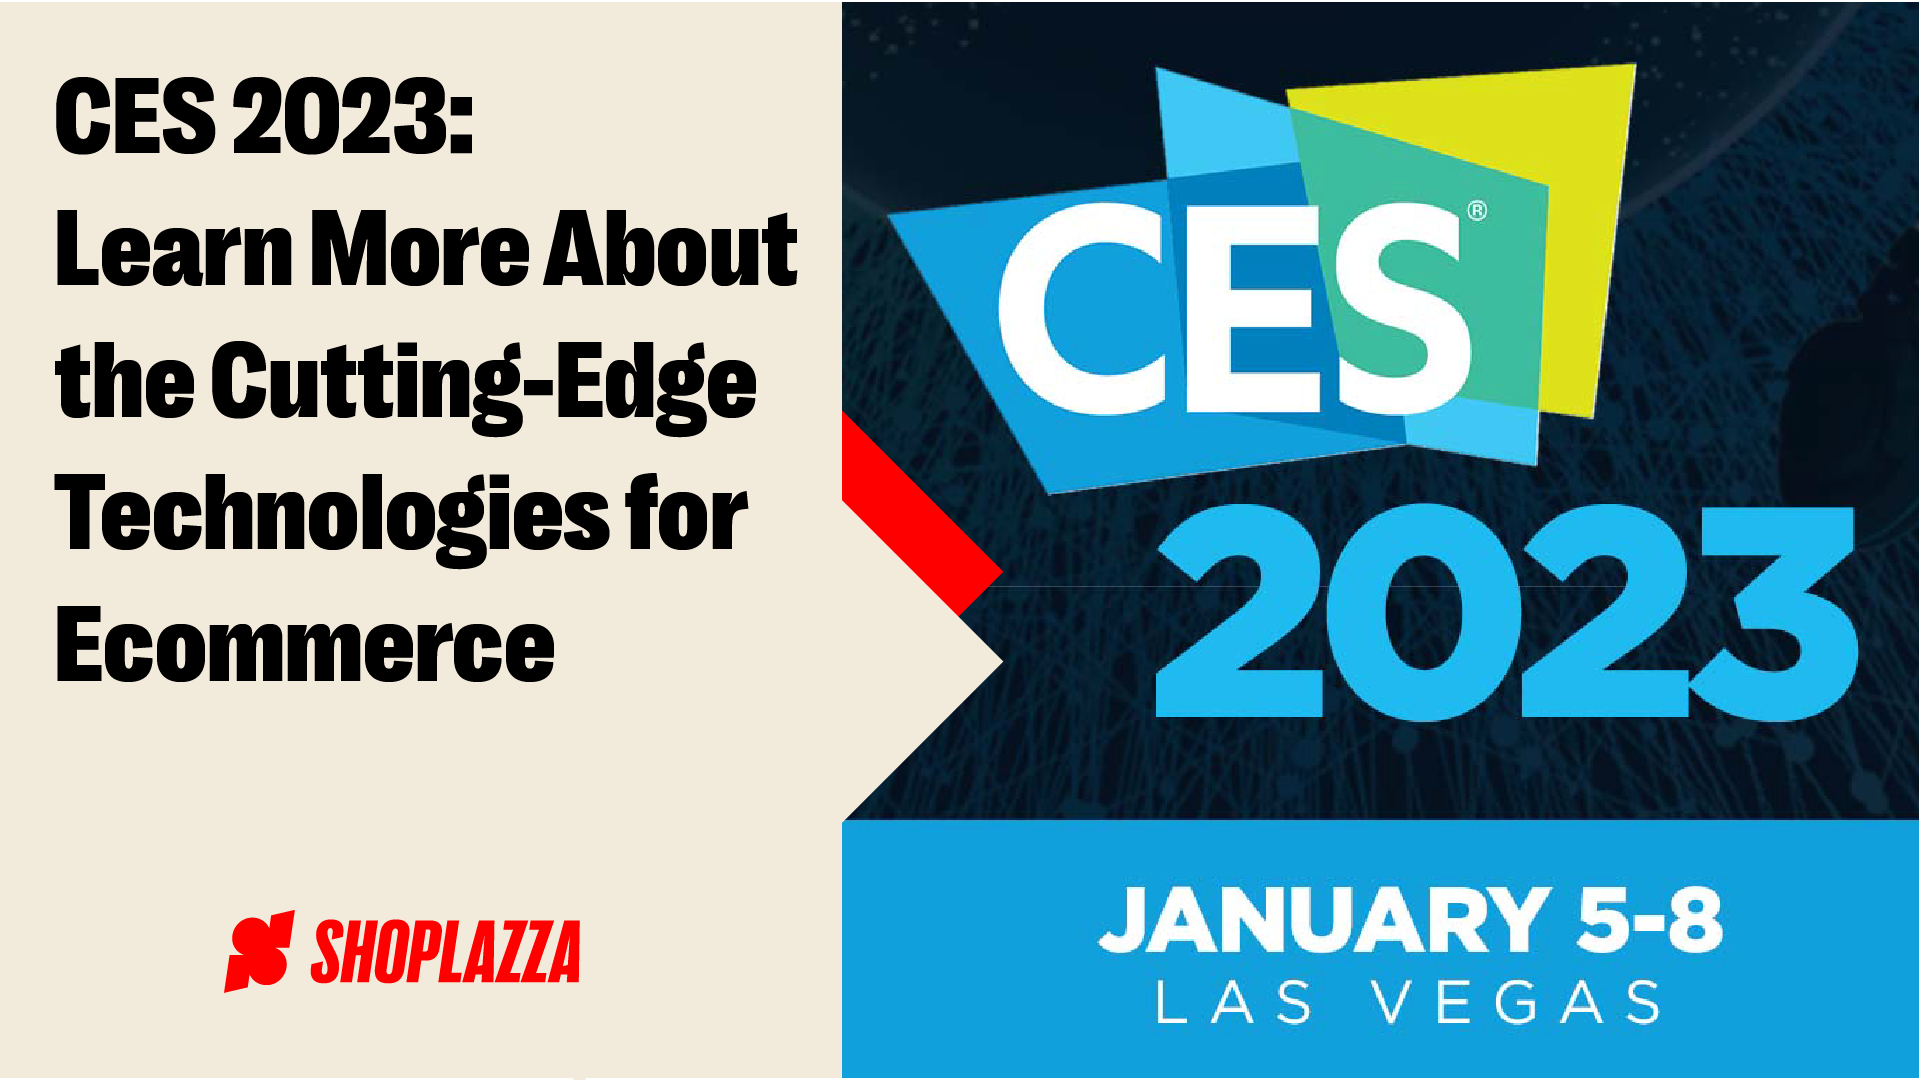 CES 2023: Learn More About the Cutting-Edge Technologies for Ecommerce